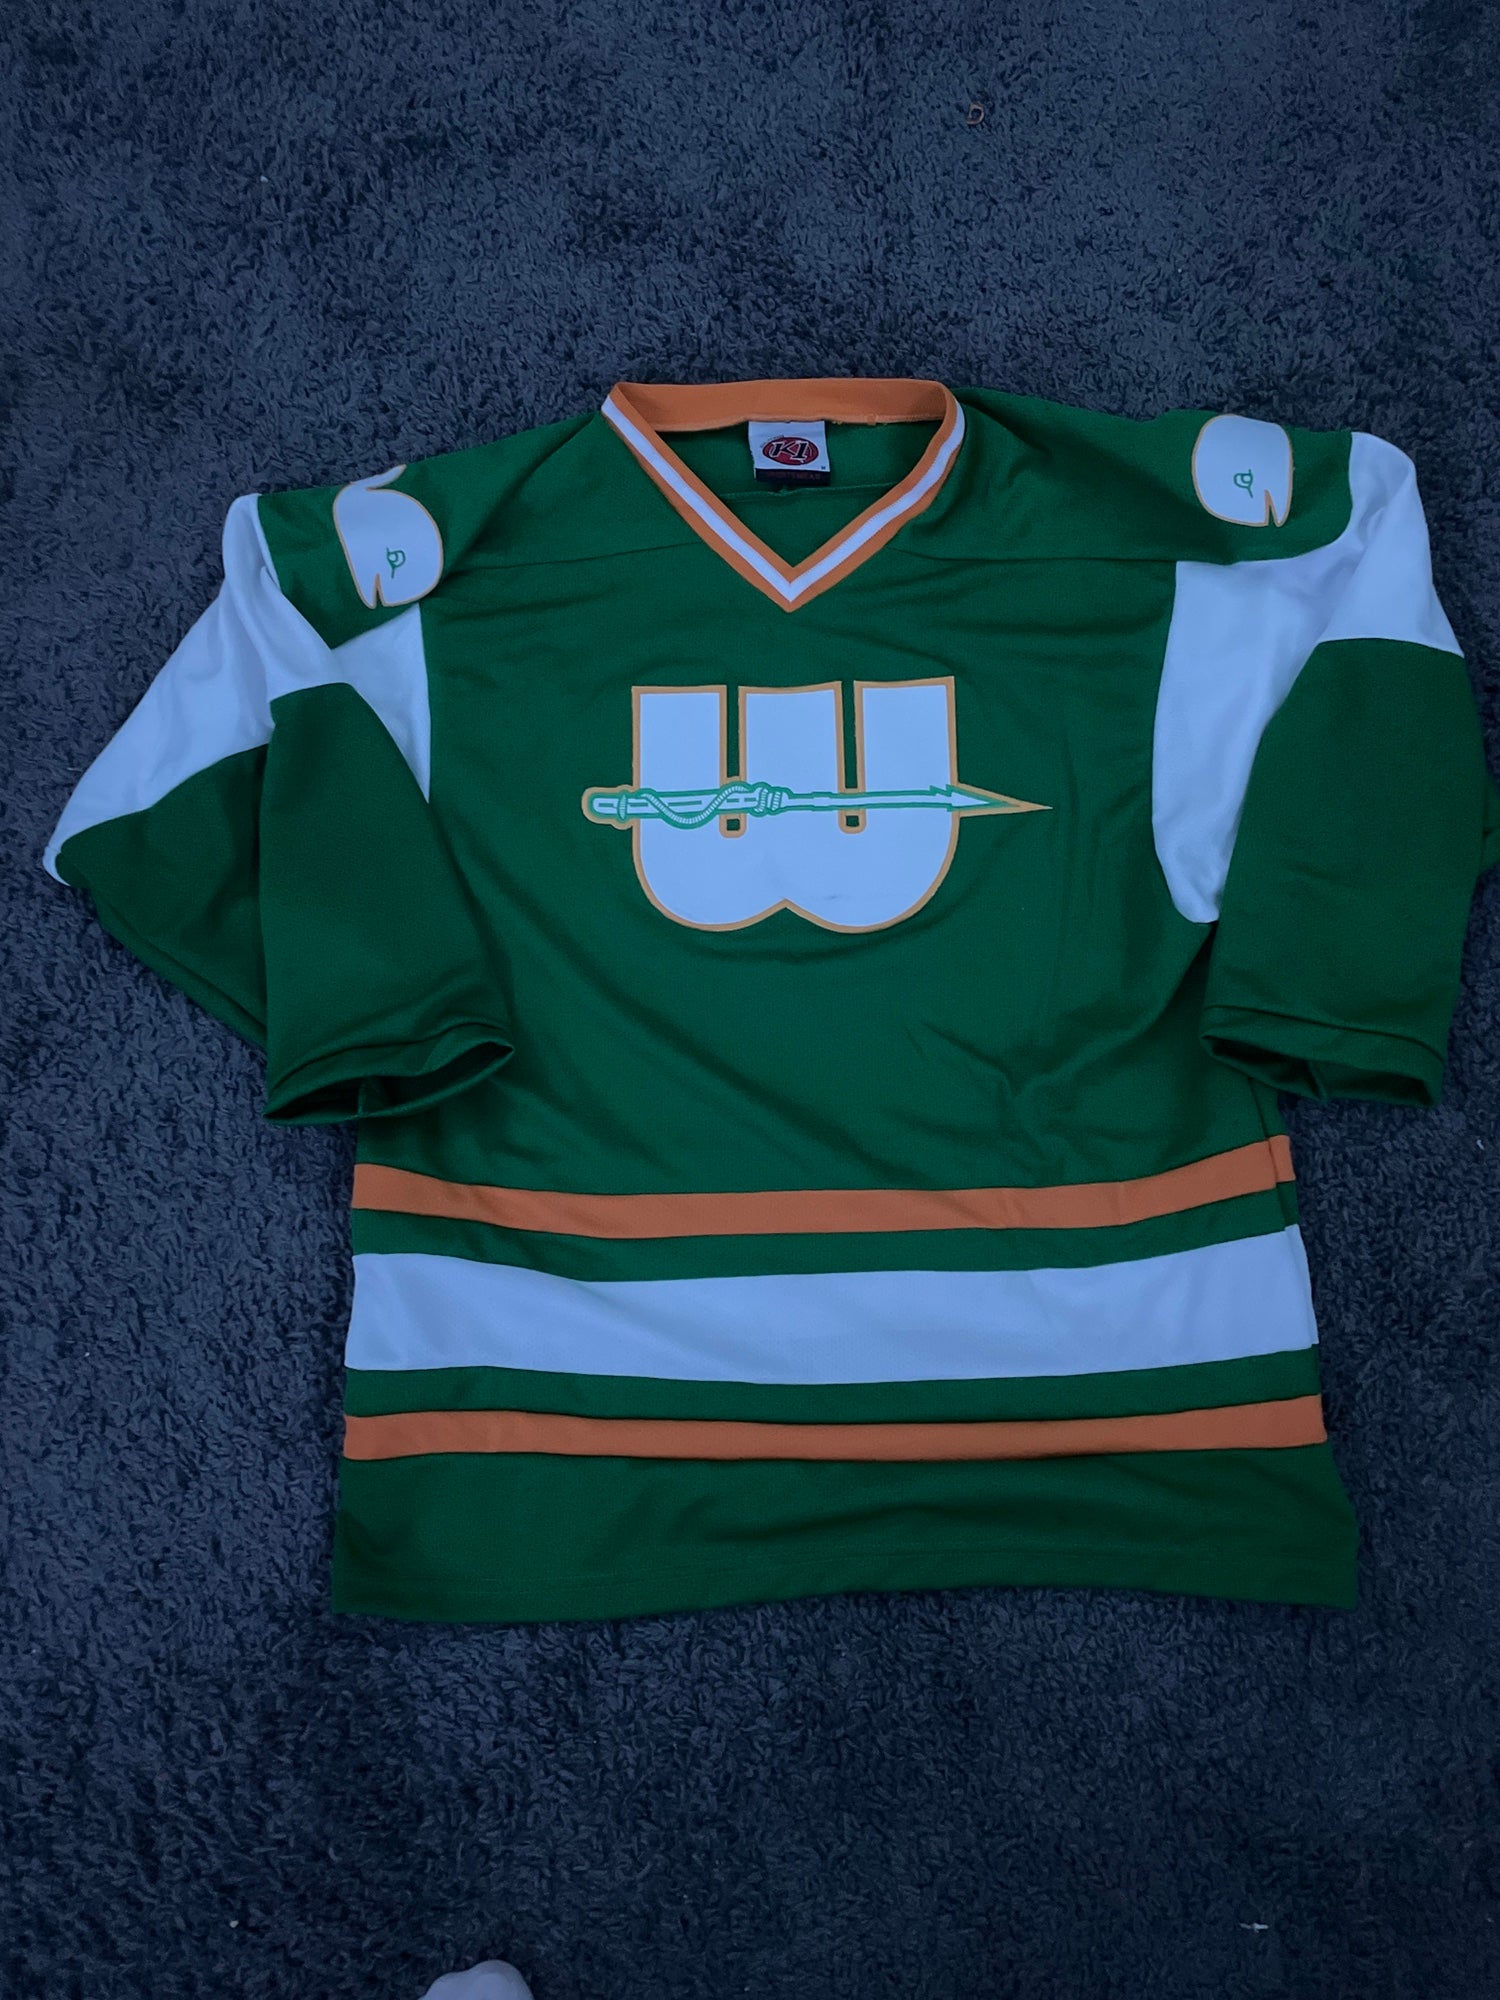 Men's Hartford Whalers Gear & Hockey Gifts, Men's Whalers Apparel, Guys'  Clothes